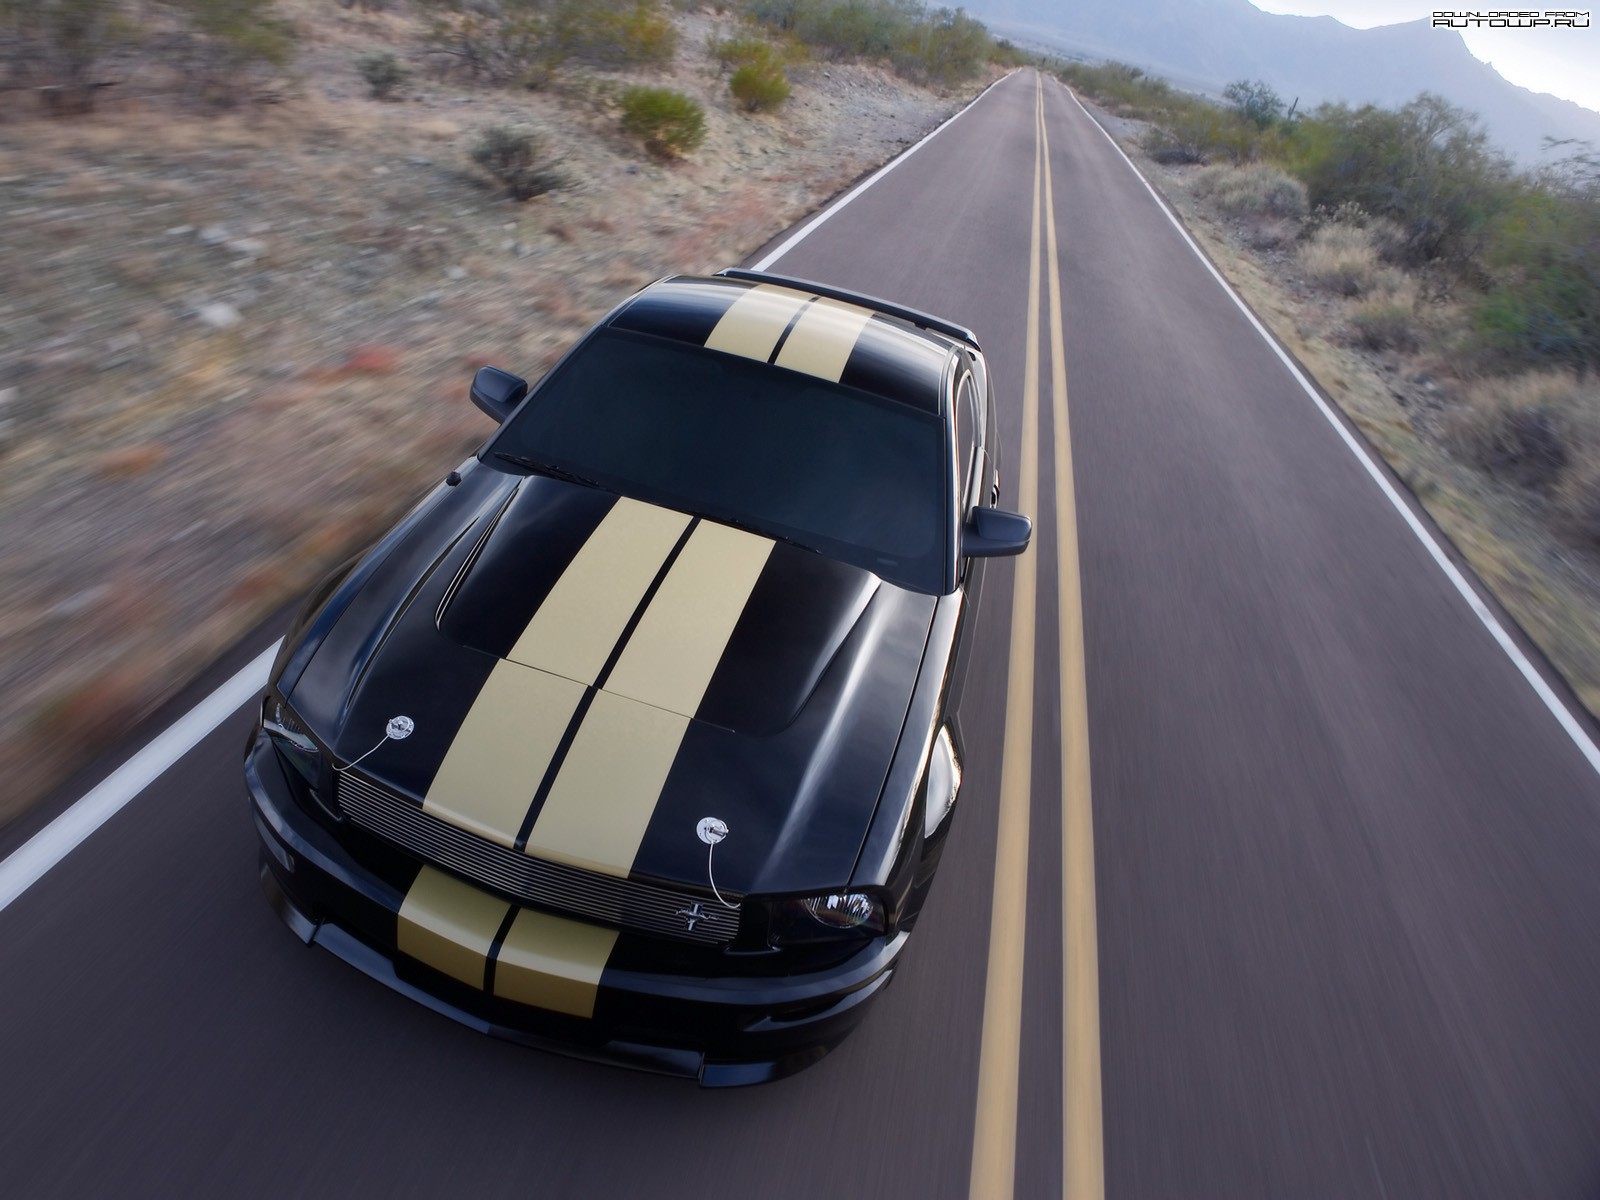 Ford Mustang, Muscle Cars, American Cars, Car Wallpaper